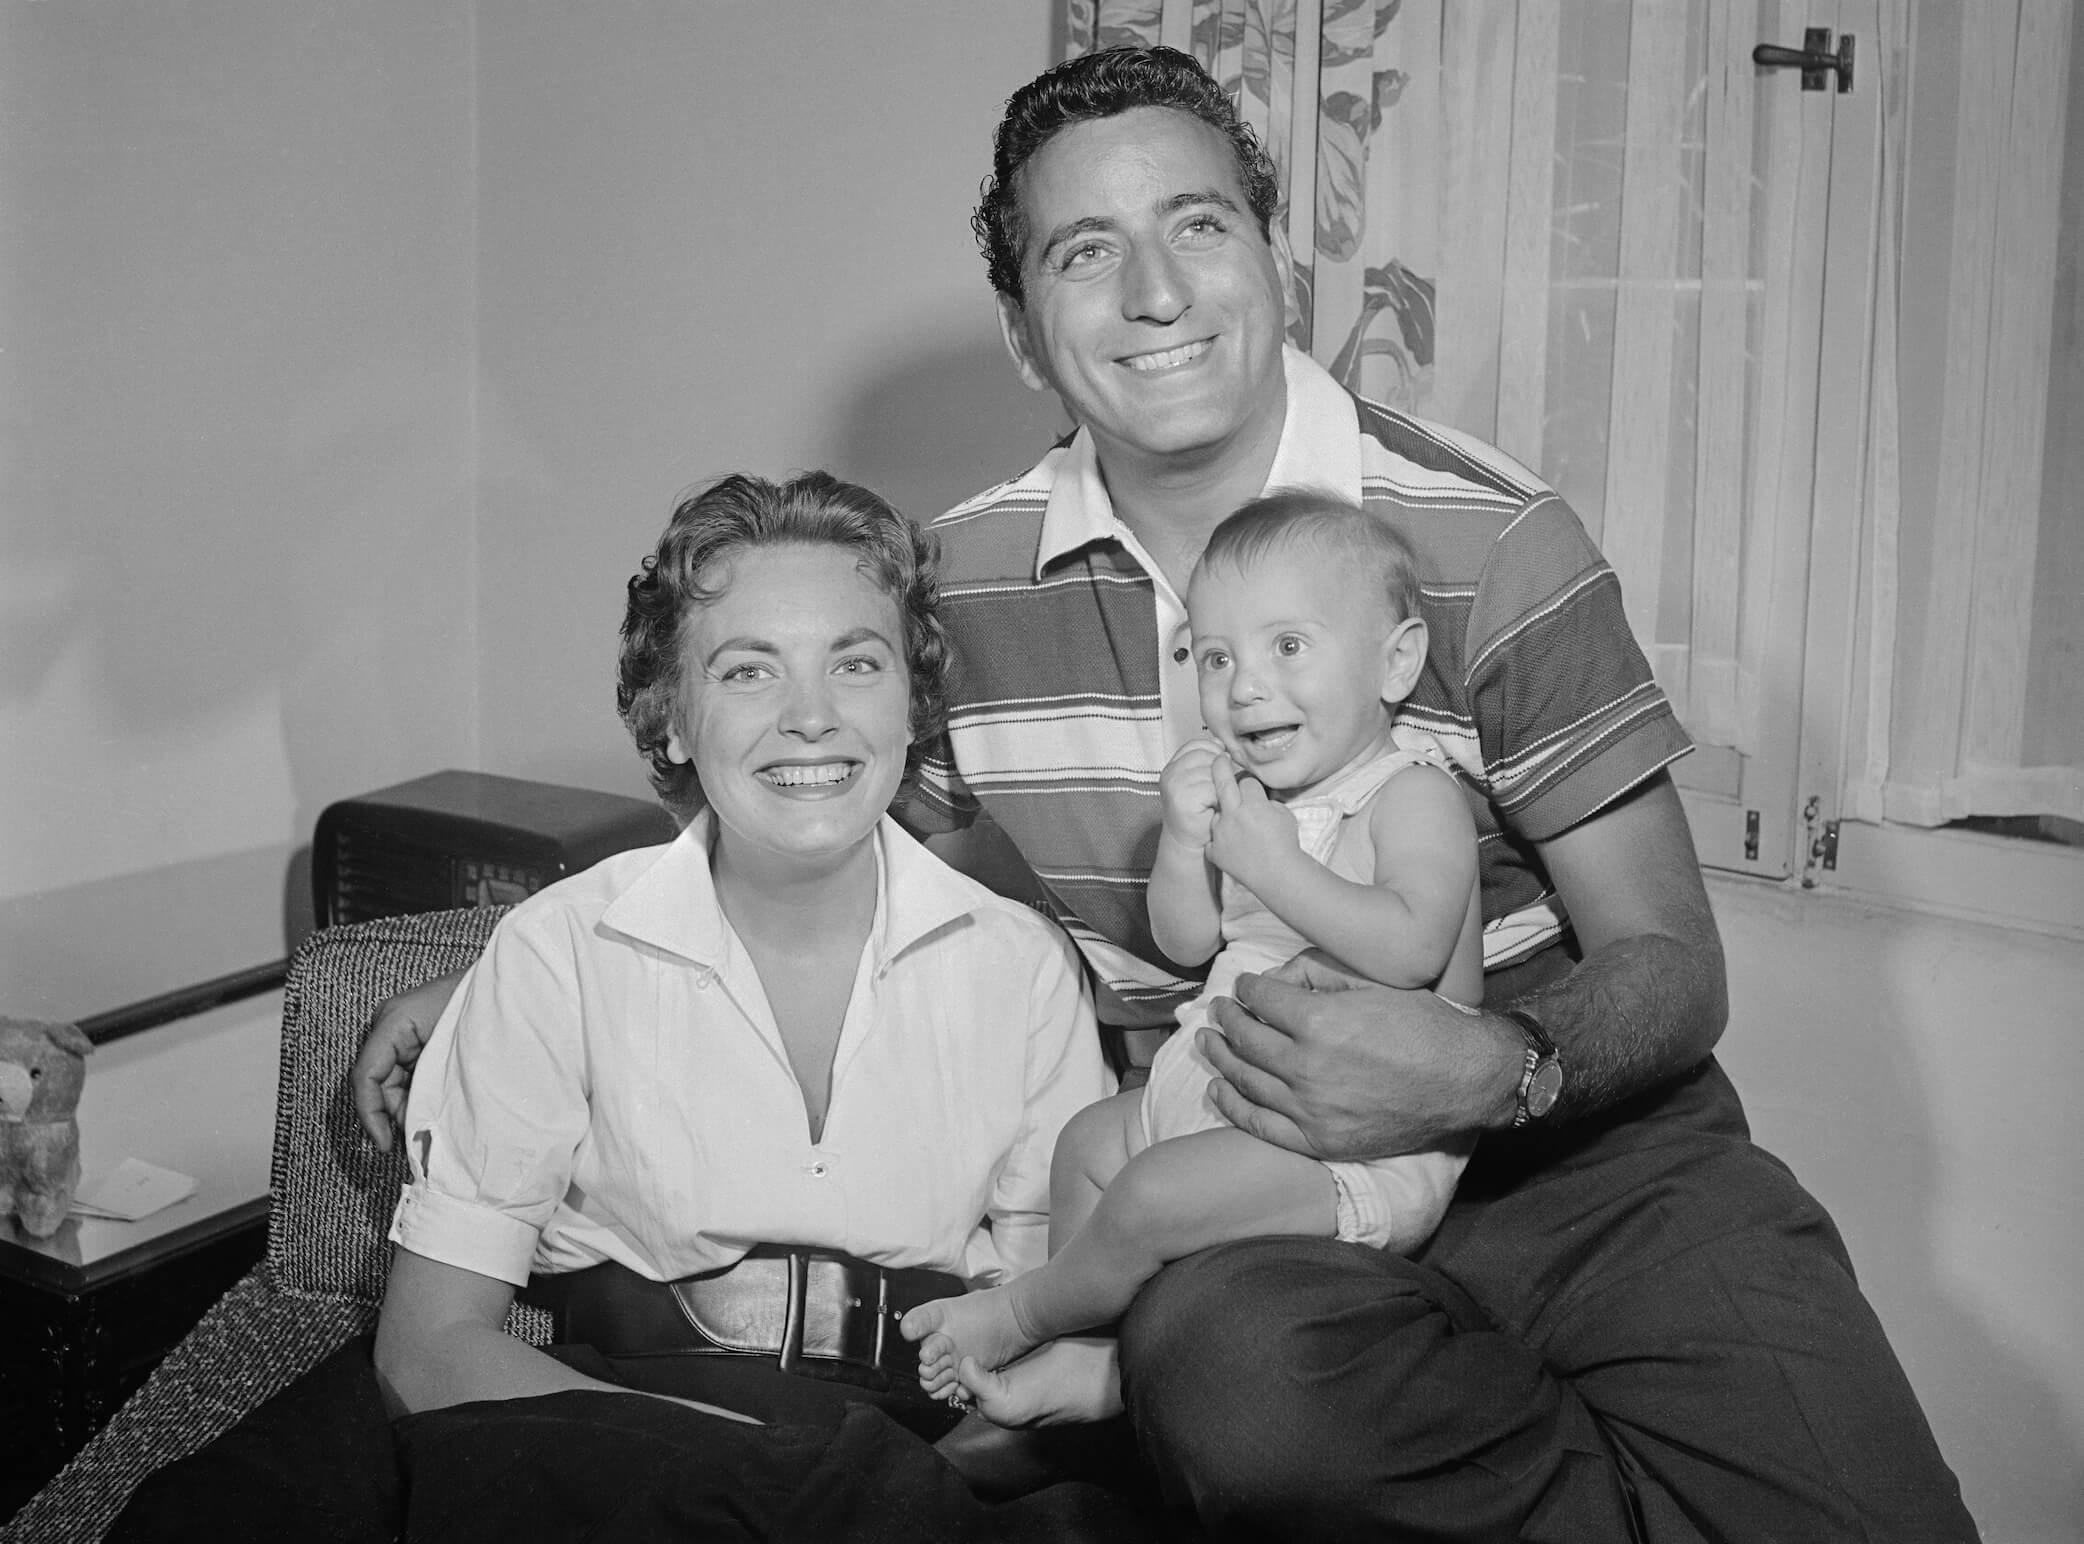 A black and white photo of Tony Bennett and his wife, Patricia Beech, smiling while he's holding their baby